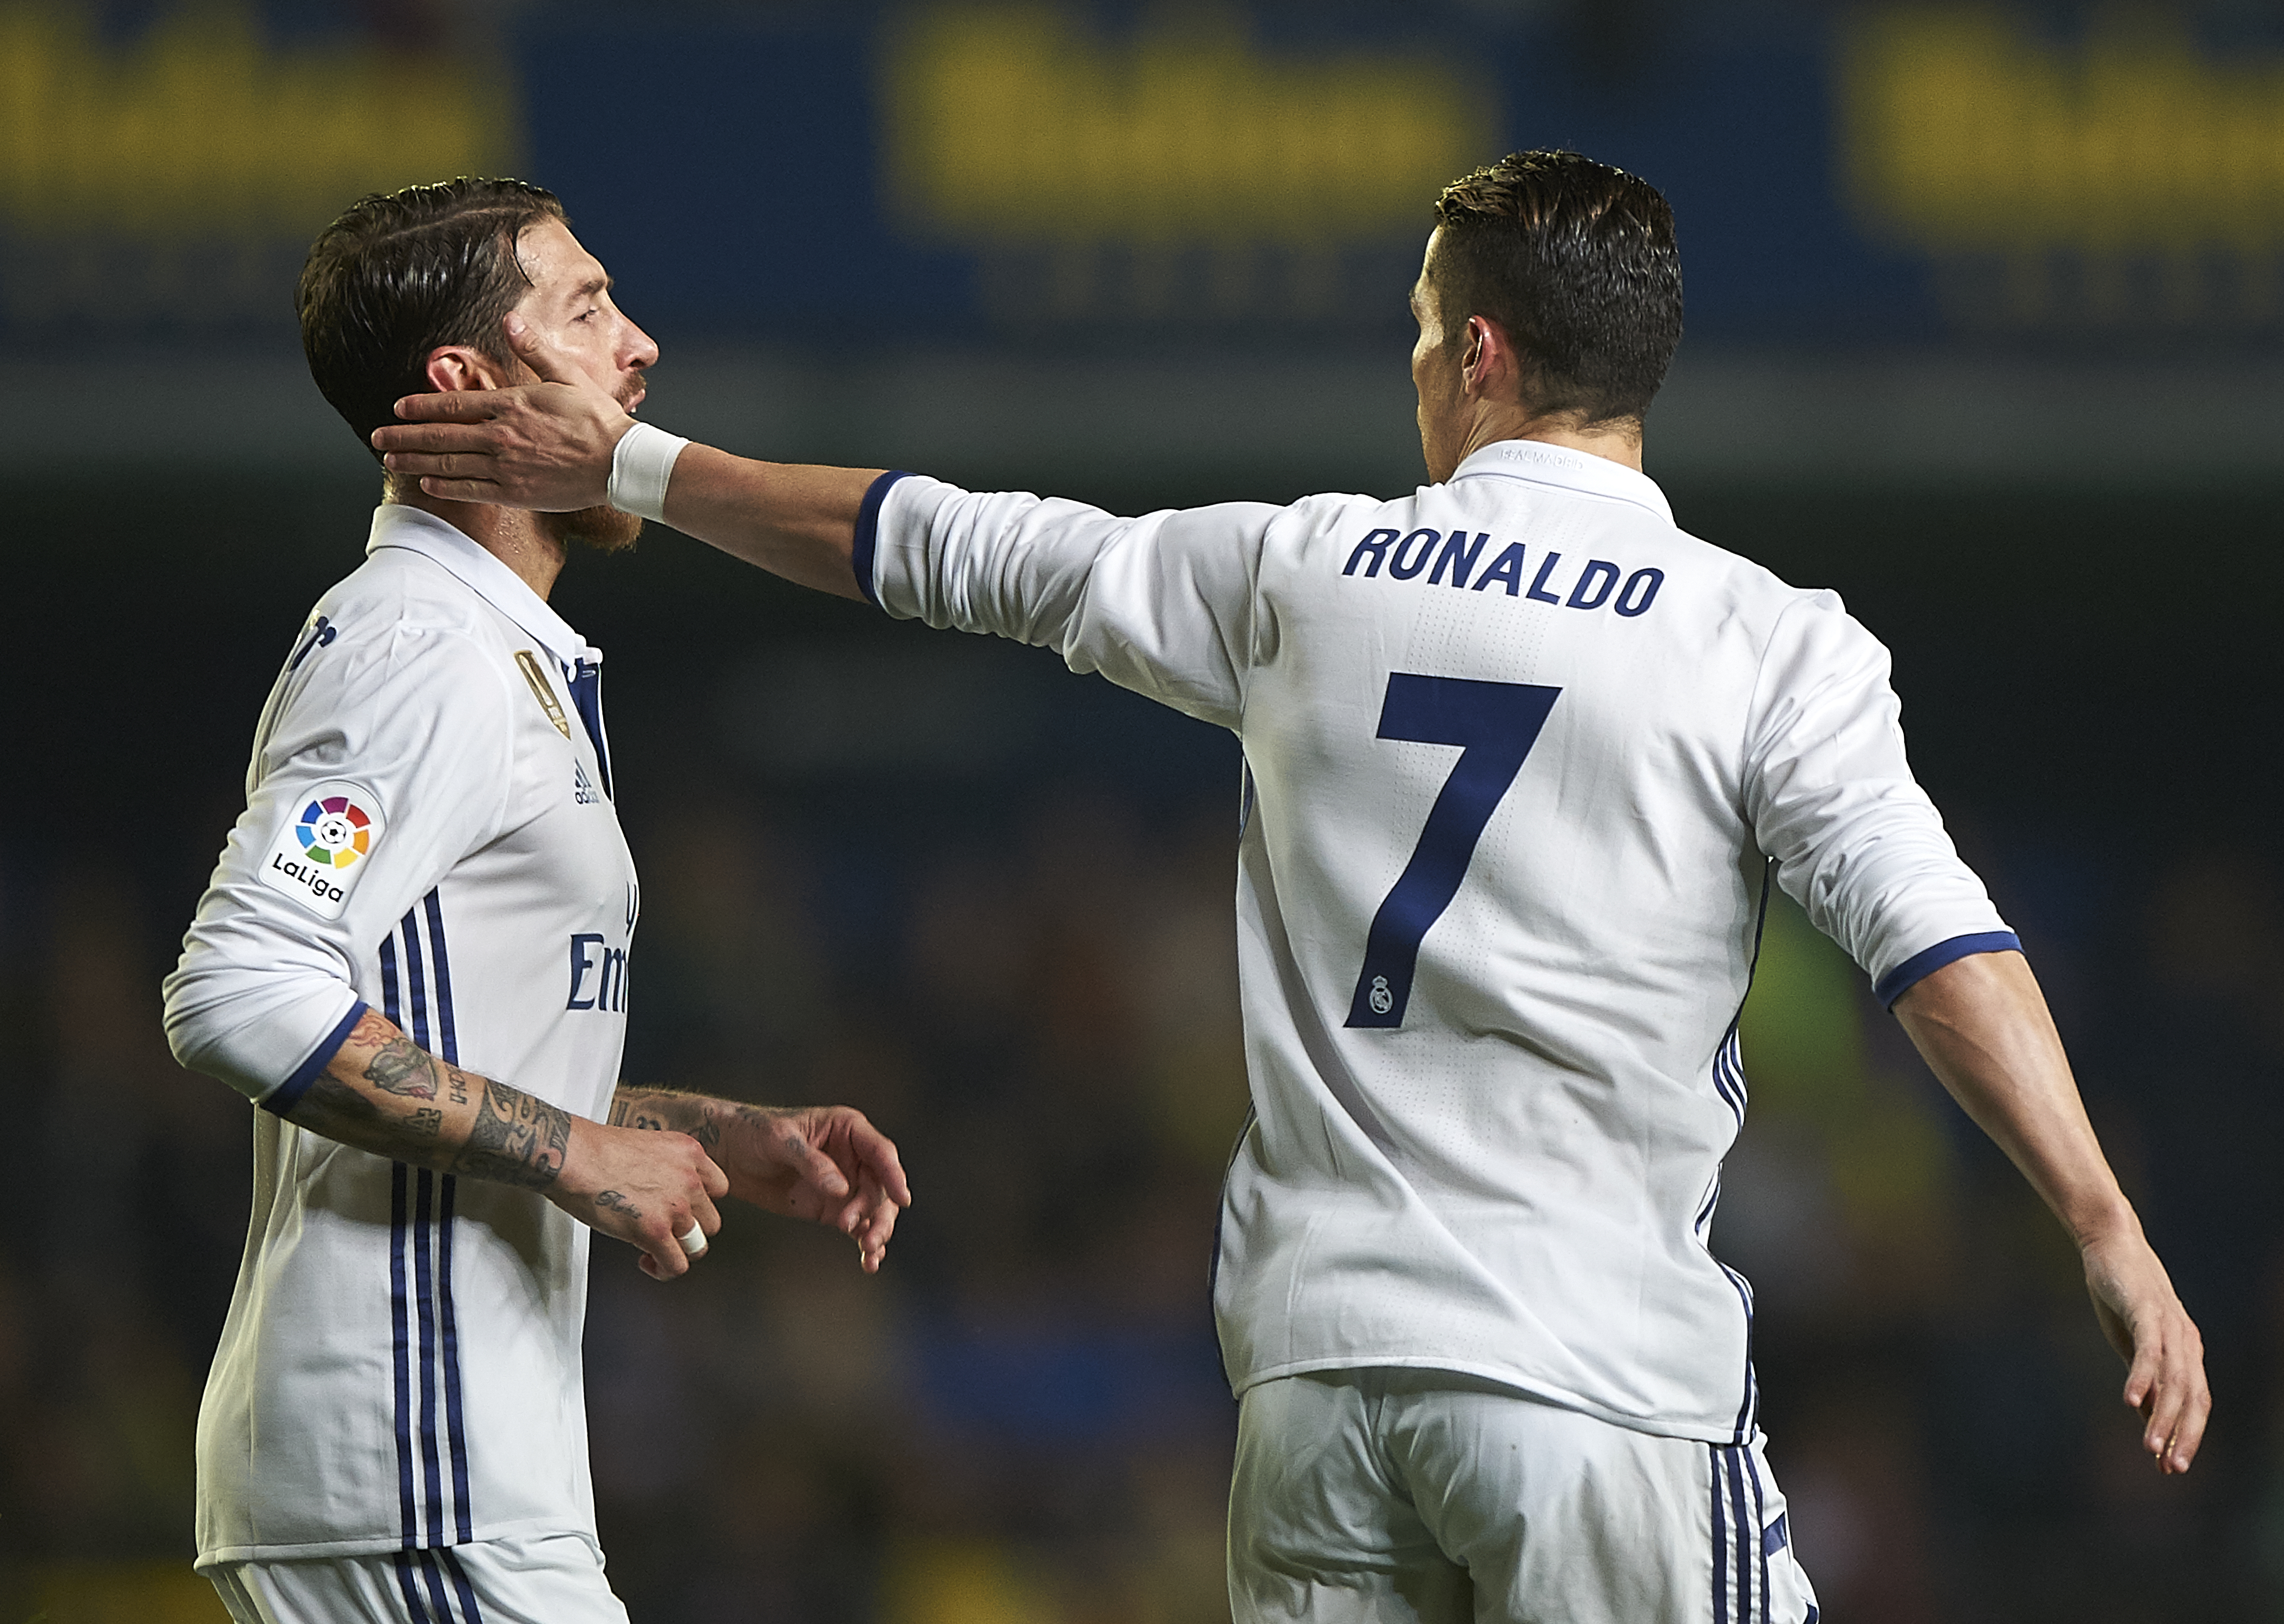 VILLARREAL, SPAIN - FEBRUARY 26:  Cristiano Ronaldo (R) of Real Madrid celebrates with Sergio Ramos of Real Madrid after scoring the second goal  during the La Liga match between Villarreal CF and Real Madrid at Estadio de la Ceramica on February 26, 2017 in Villarreal, Spain.  (Photo by Fotopress/Getty Images)